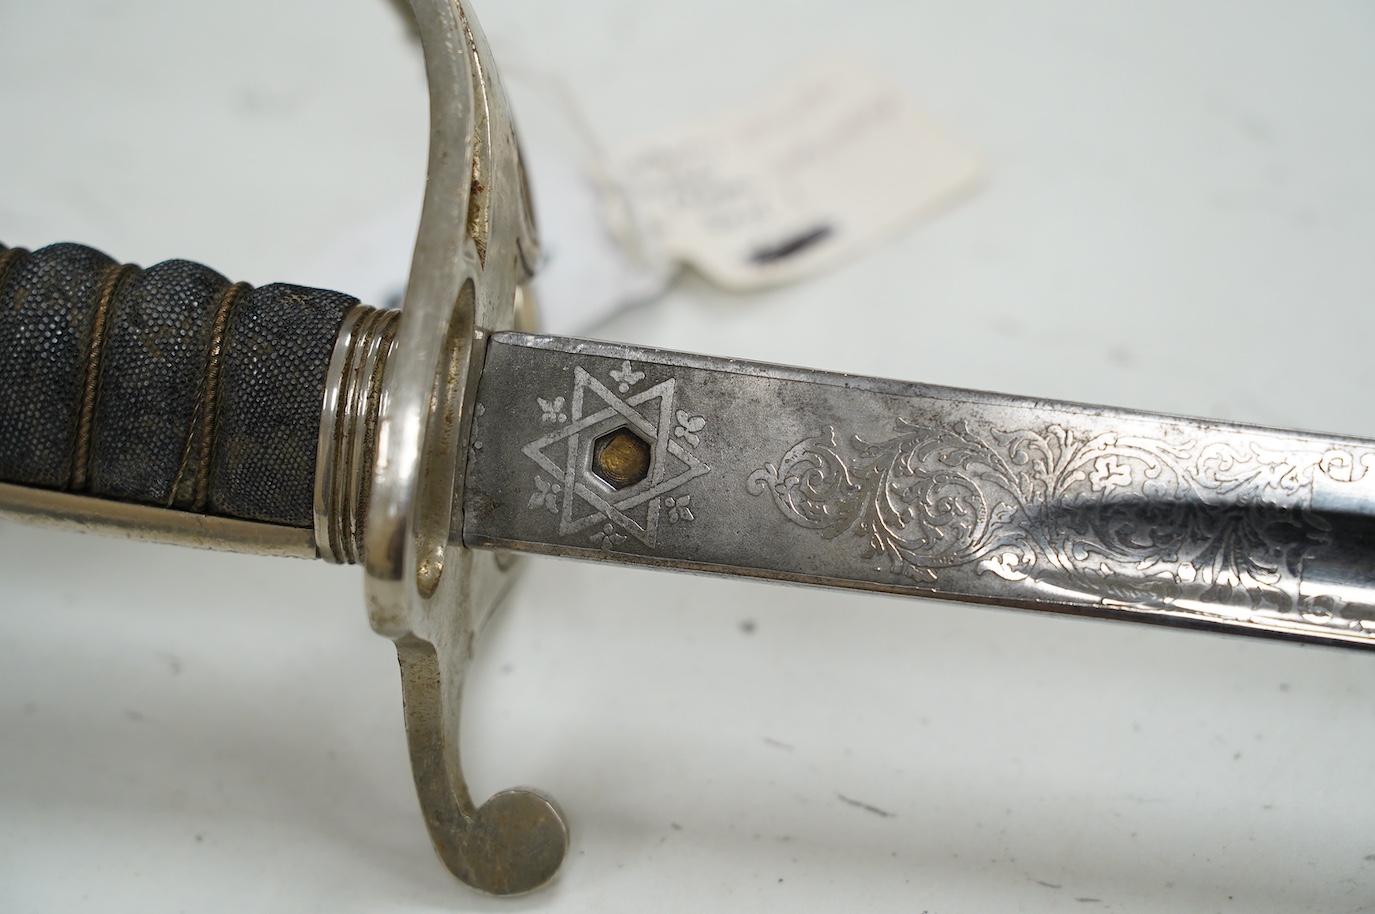 A George VI Royal Artillery officer’s sword, regulation etched blade and plated triple bar guard, blade 85.5cm. Condition - good